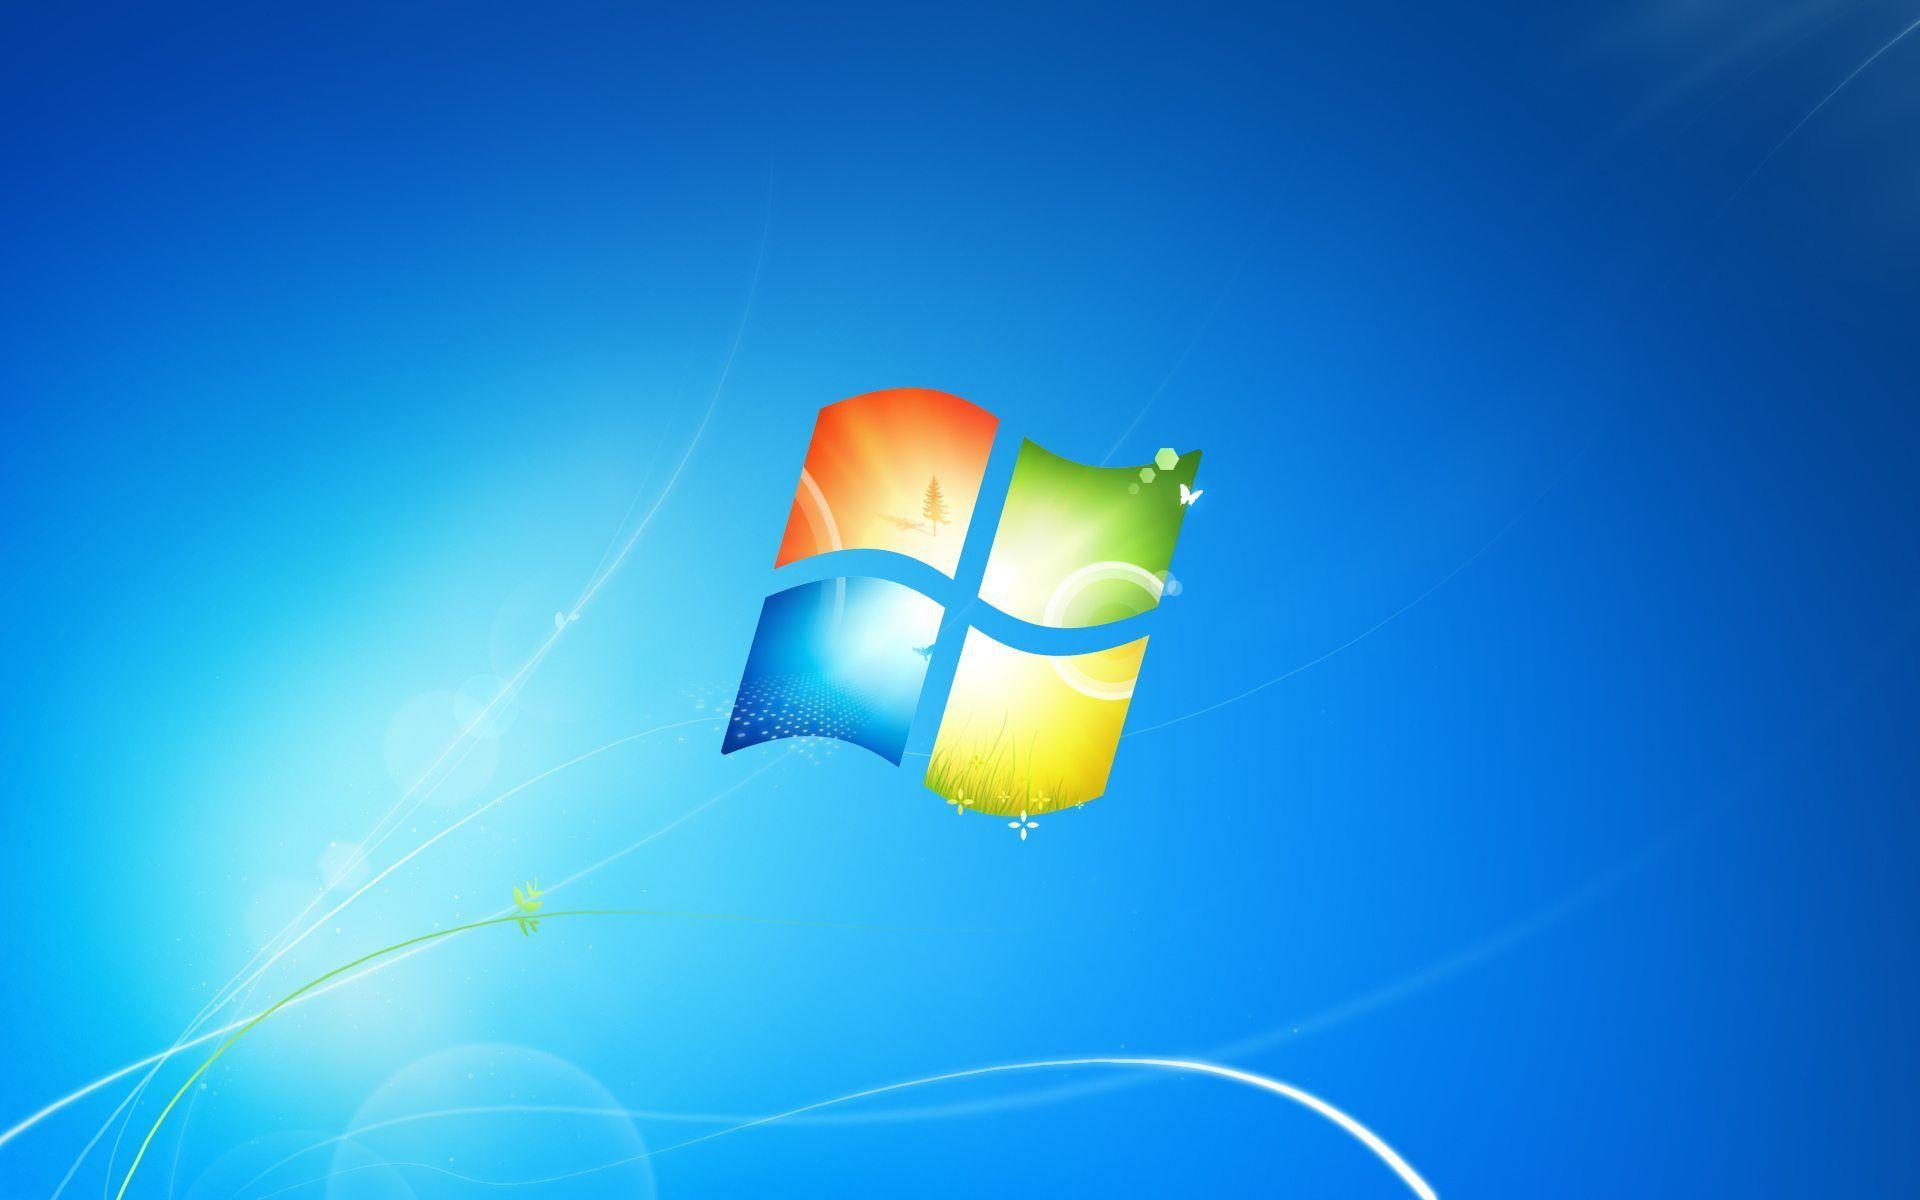 Windows 7 Wallpapers Top Free Windows 7 Backgrounds Wallpaperaccess